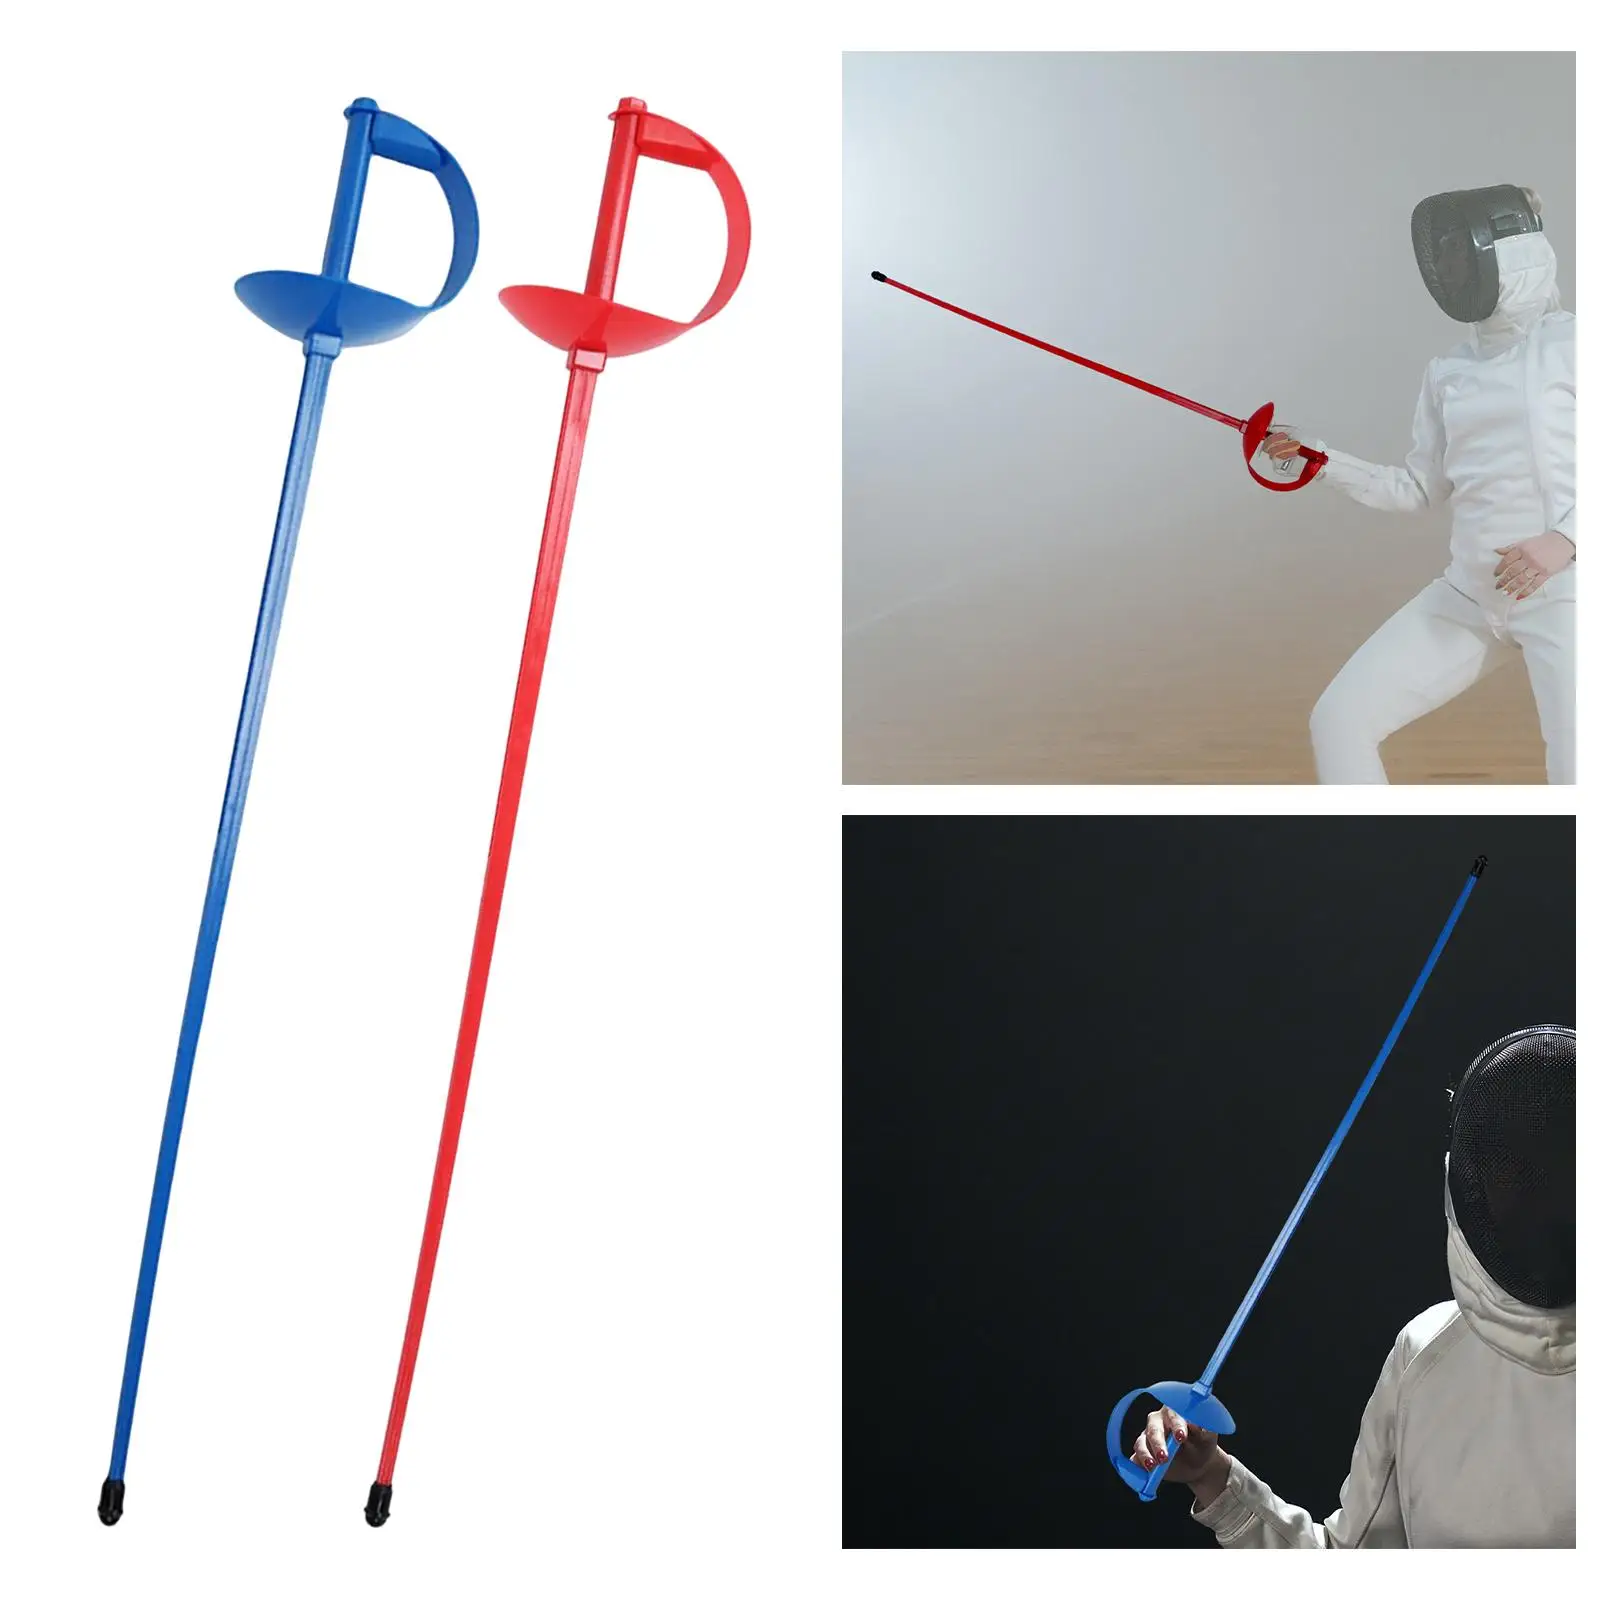 Children`s Fencing Saber SparTraining Aid Halloween Presents Teaching Coaches Training Stick Practices Fencing